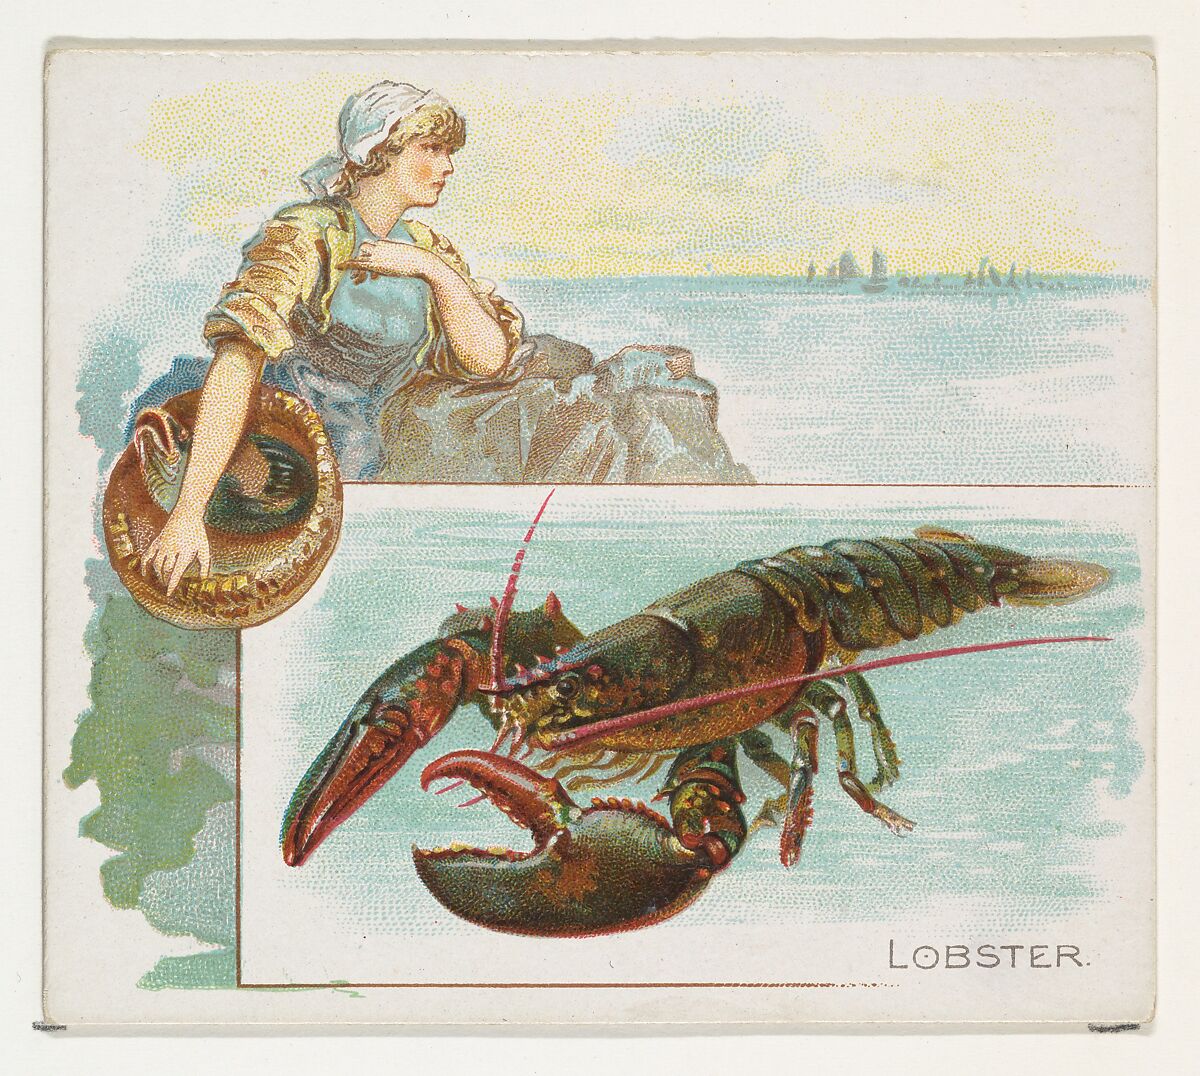 Lobster, from Fish from American Waters series (N39) for Allen & Ginter Cigarettes, Issued by Allen &amp; Ginter (American, Richmond, Virginia), Commercial color lithograph 